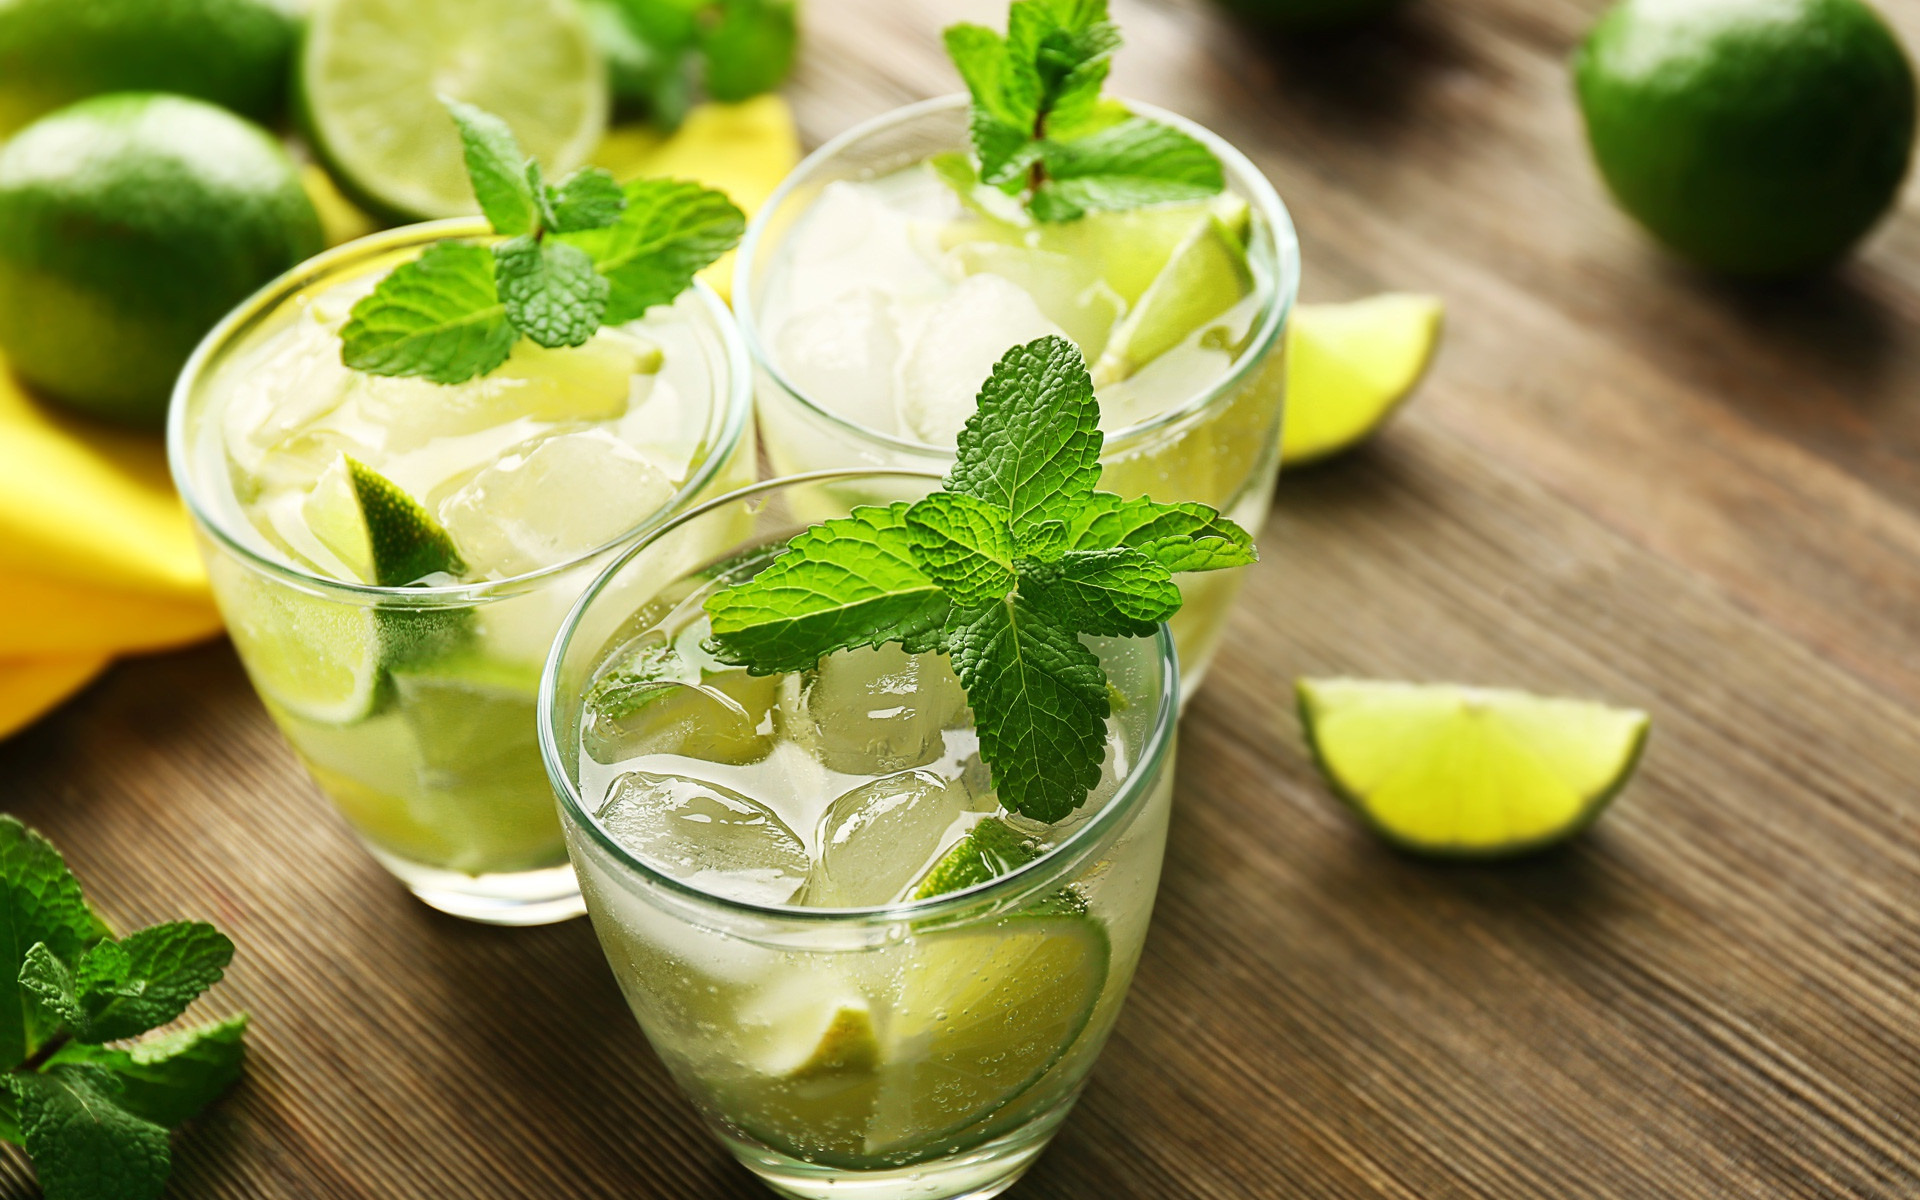 Download wallpapers mojitos, mint drinks, mojito glasses, summer ...